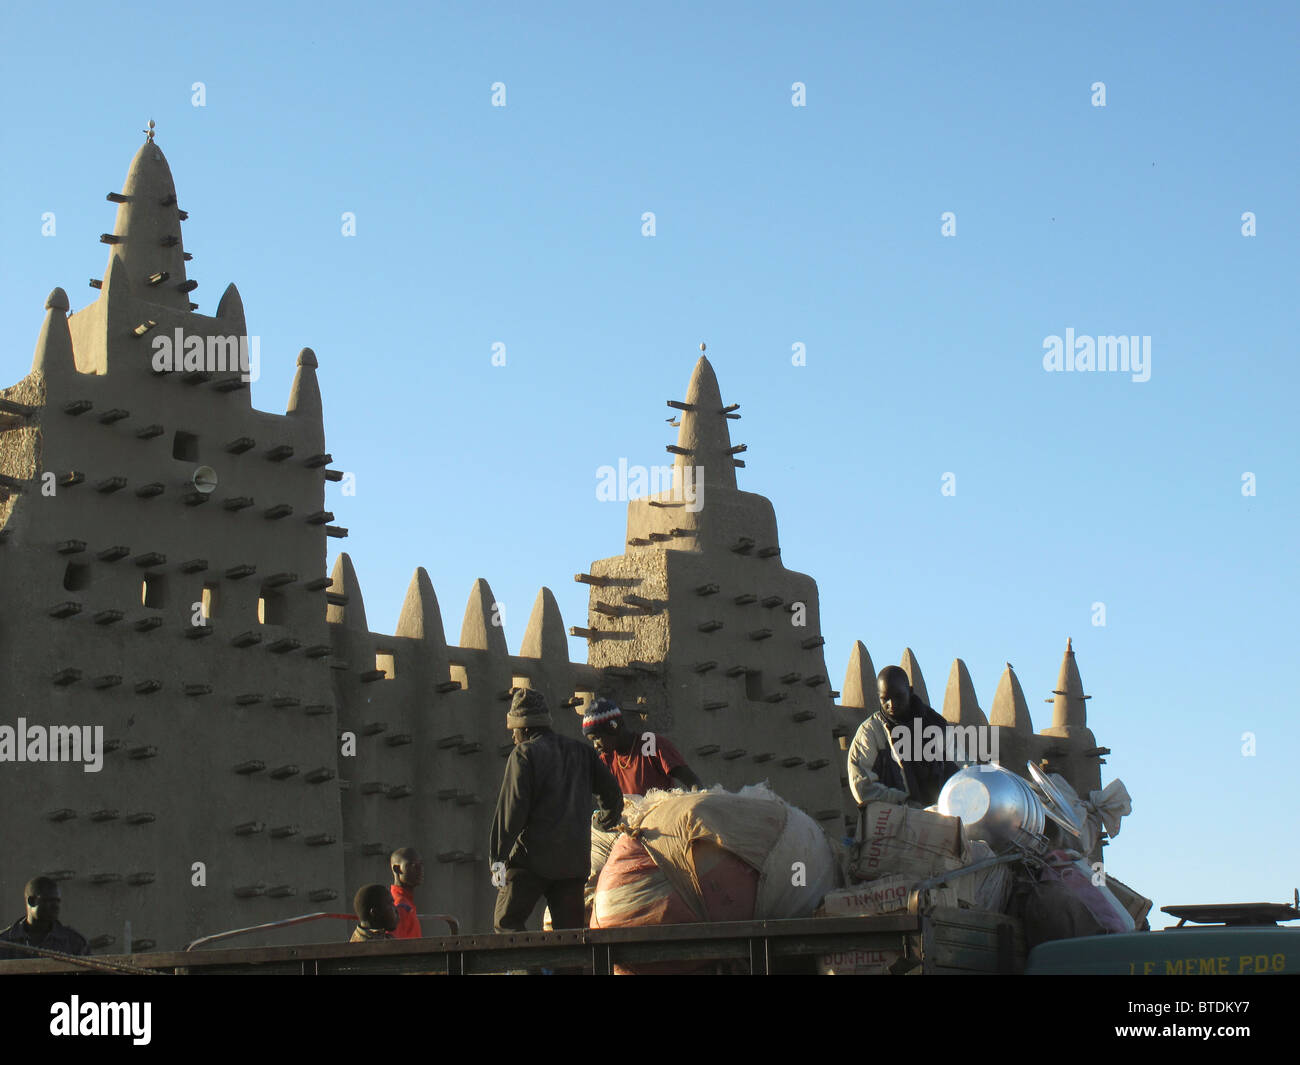 Djenne mosque built with sandstone with its unique design Stock Photo